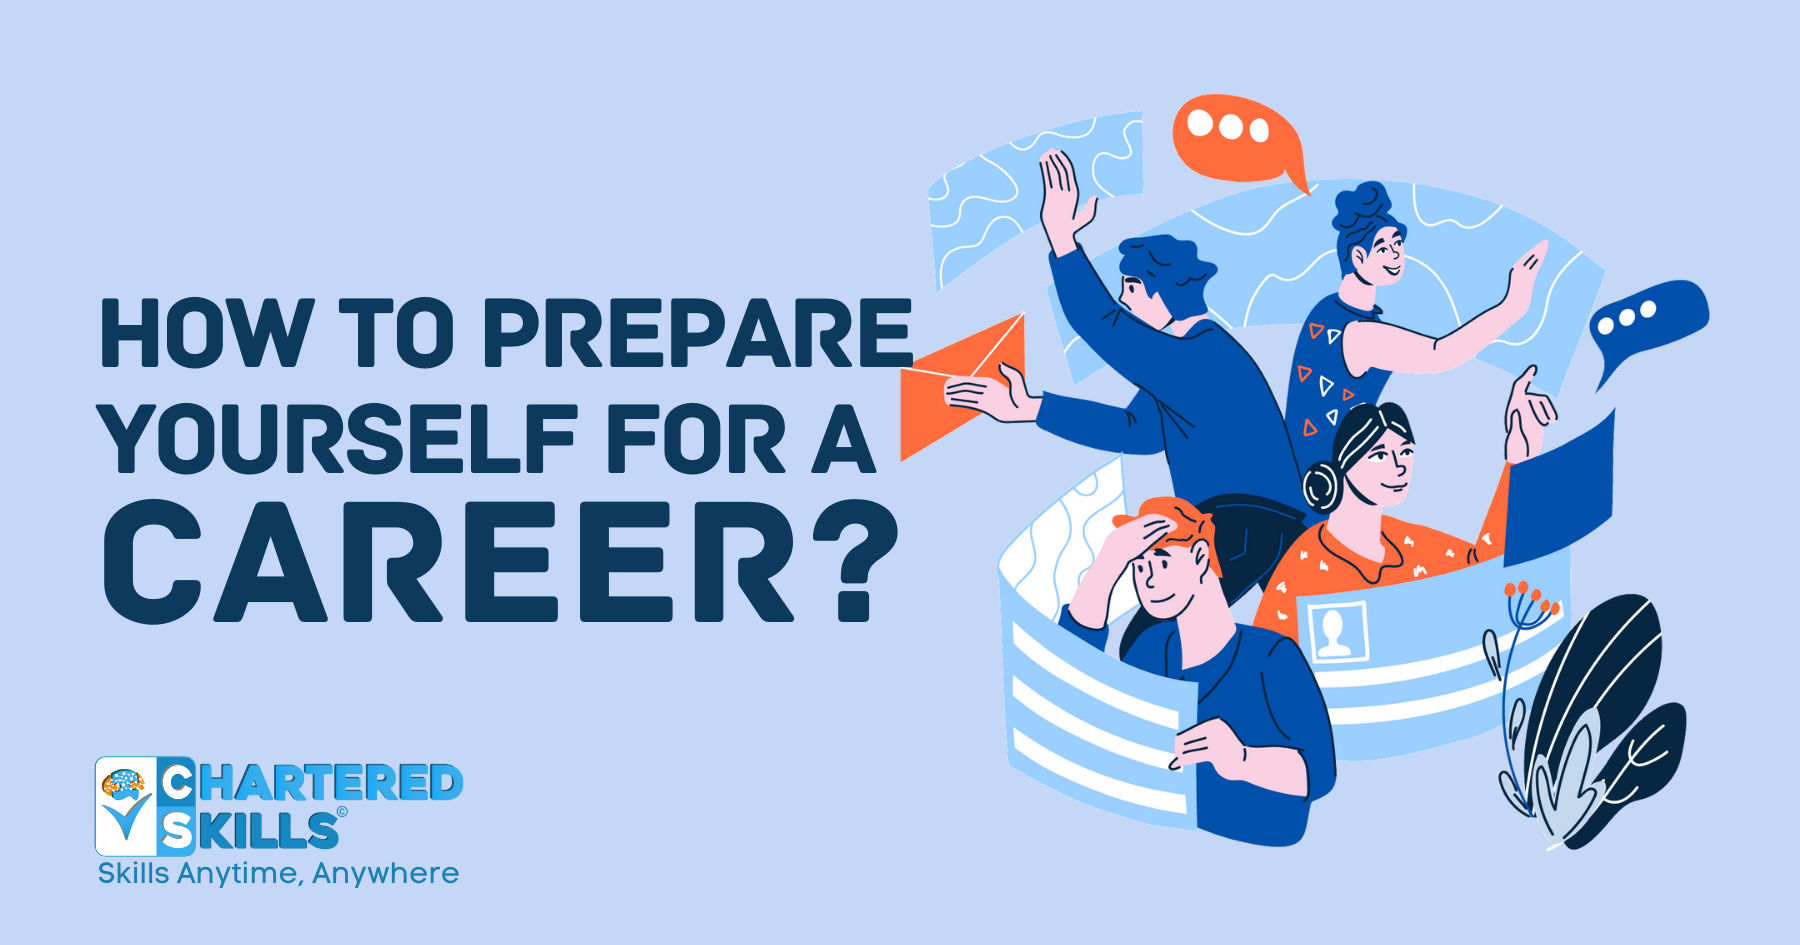 How to prepare yourself for a career?